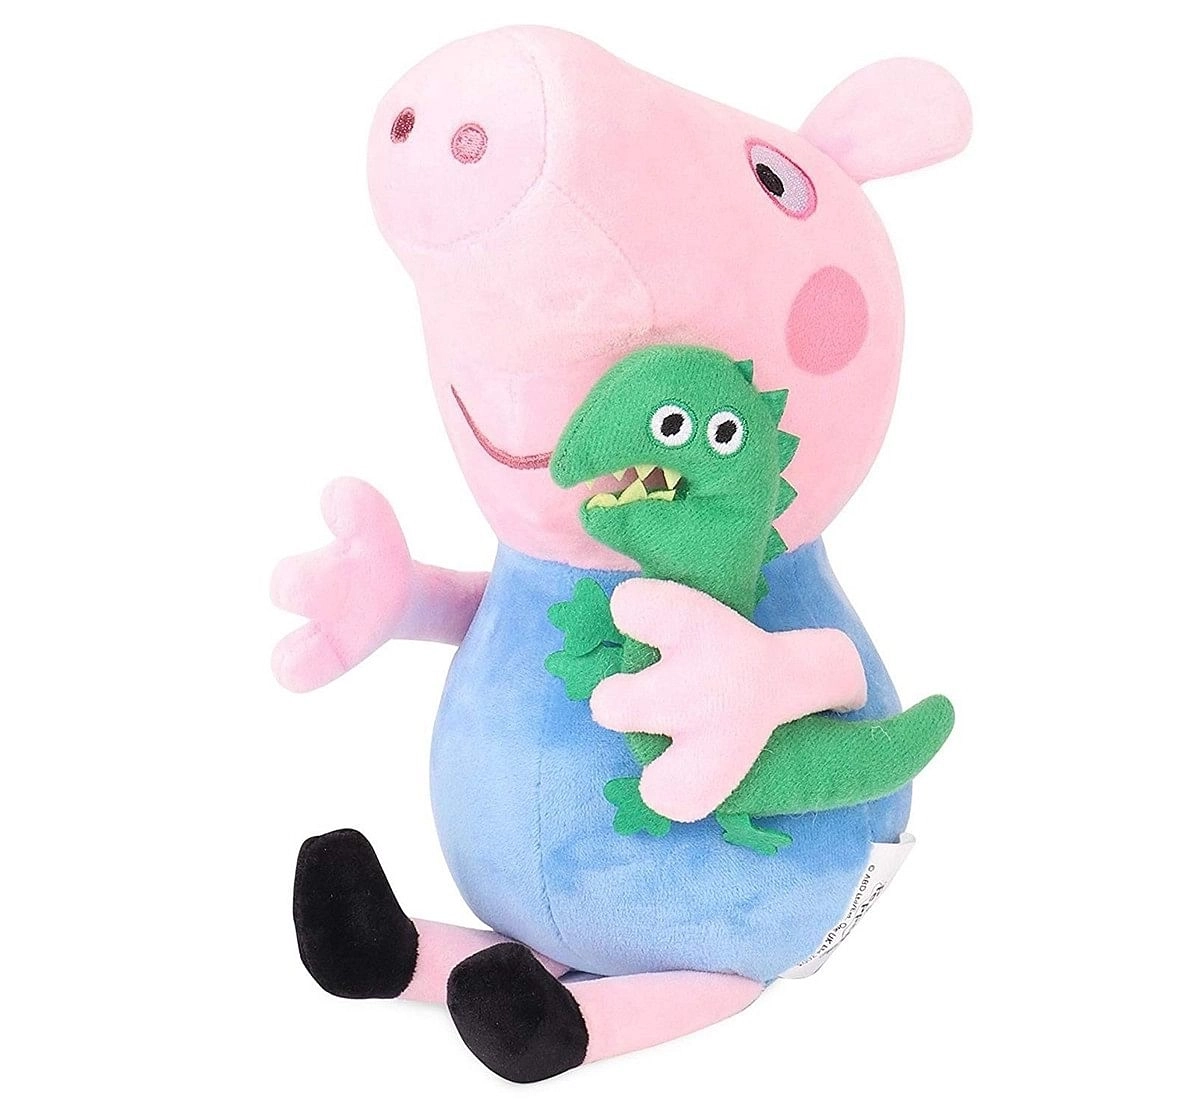 Peppa George Pig with Dinosaur 19 Cm  Soft Toy for Kids age 0M+ (Blue)